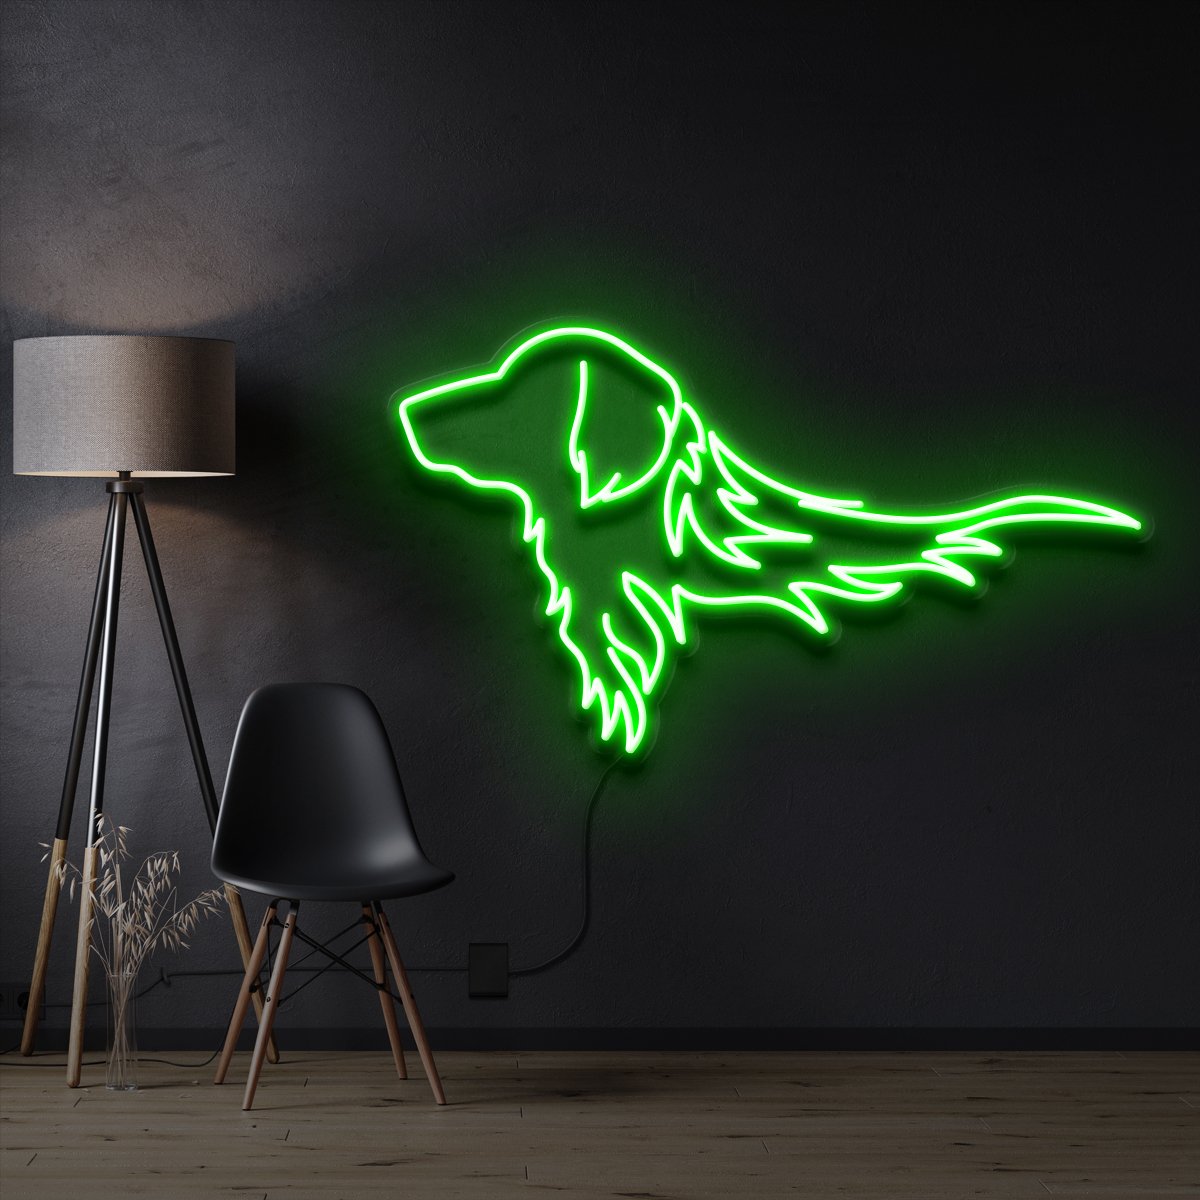 "Golden Retriever" Pet Neon Sign 60cm / Green / Cut to Shape by Neon Icons